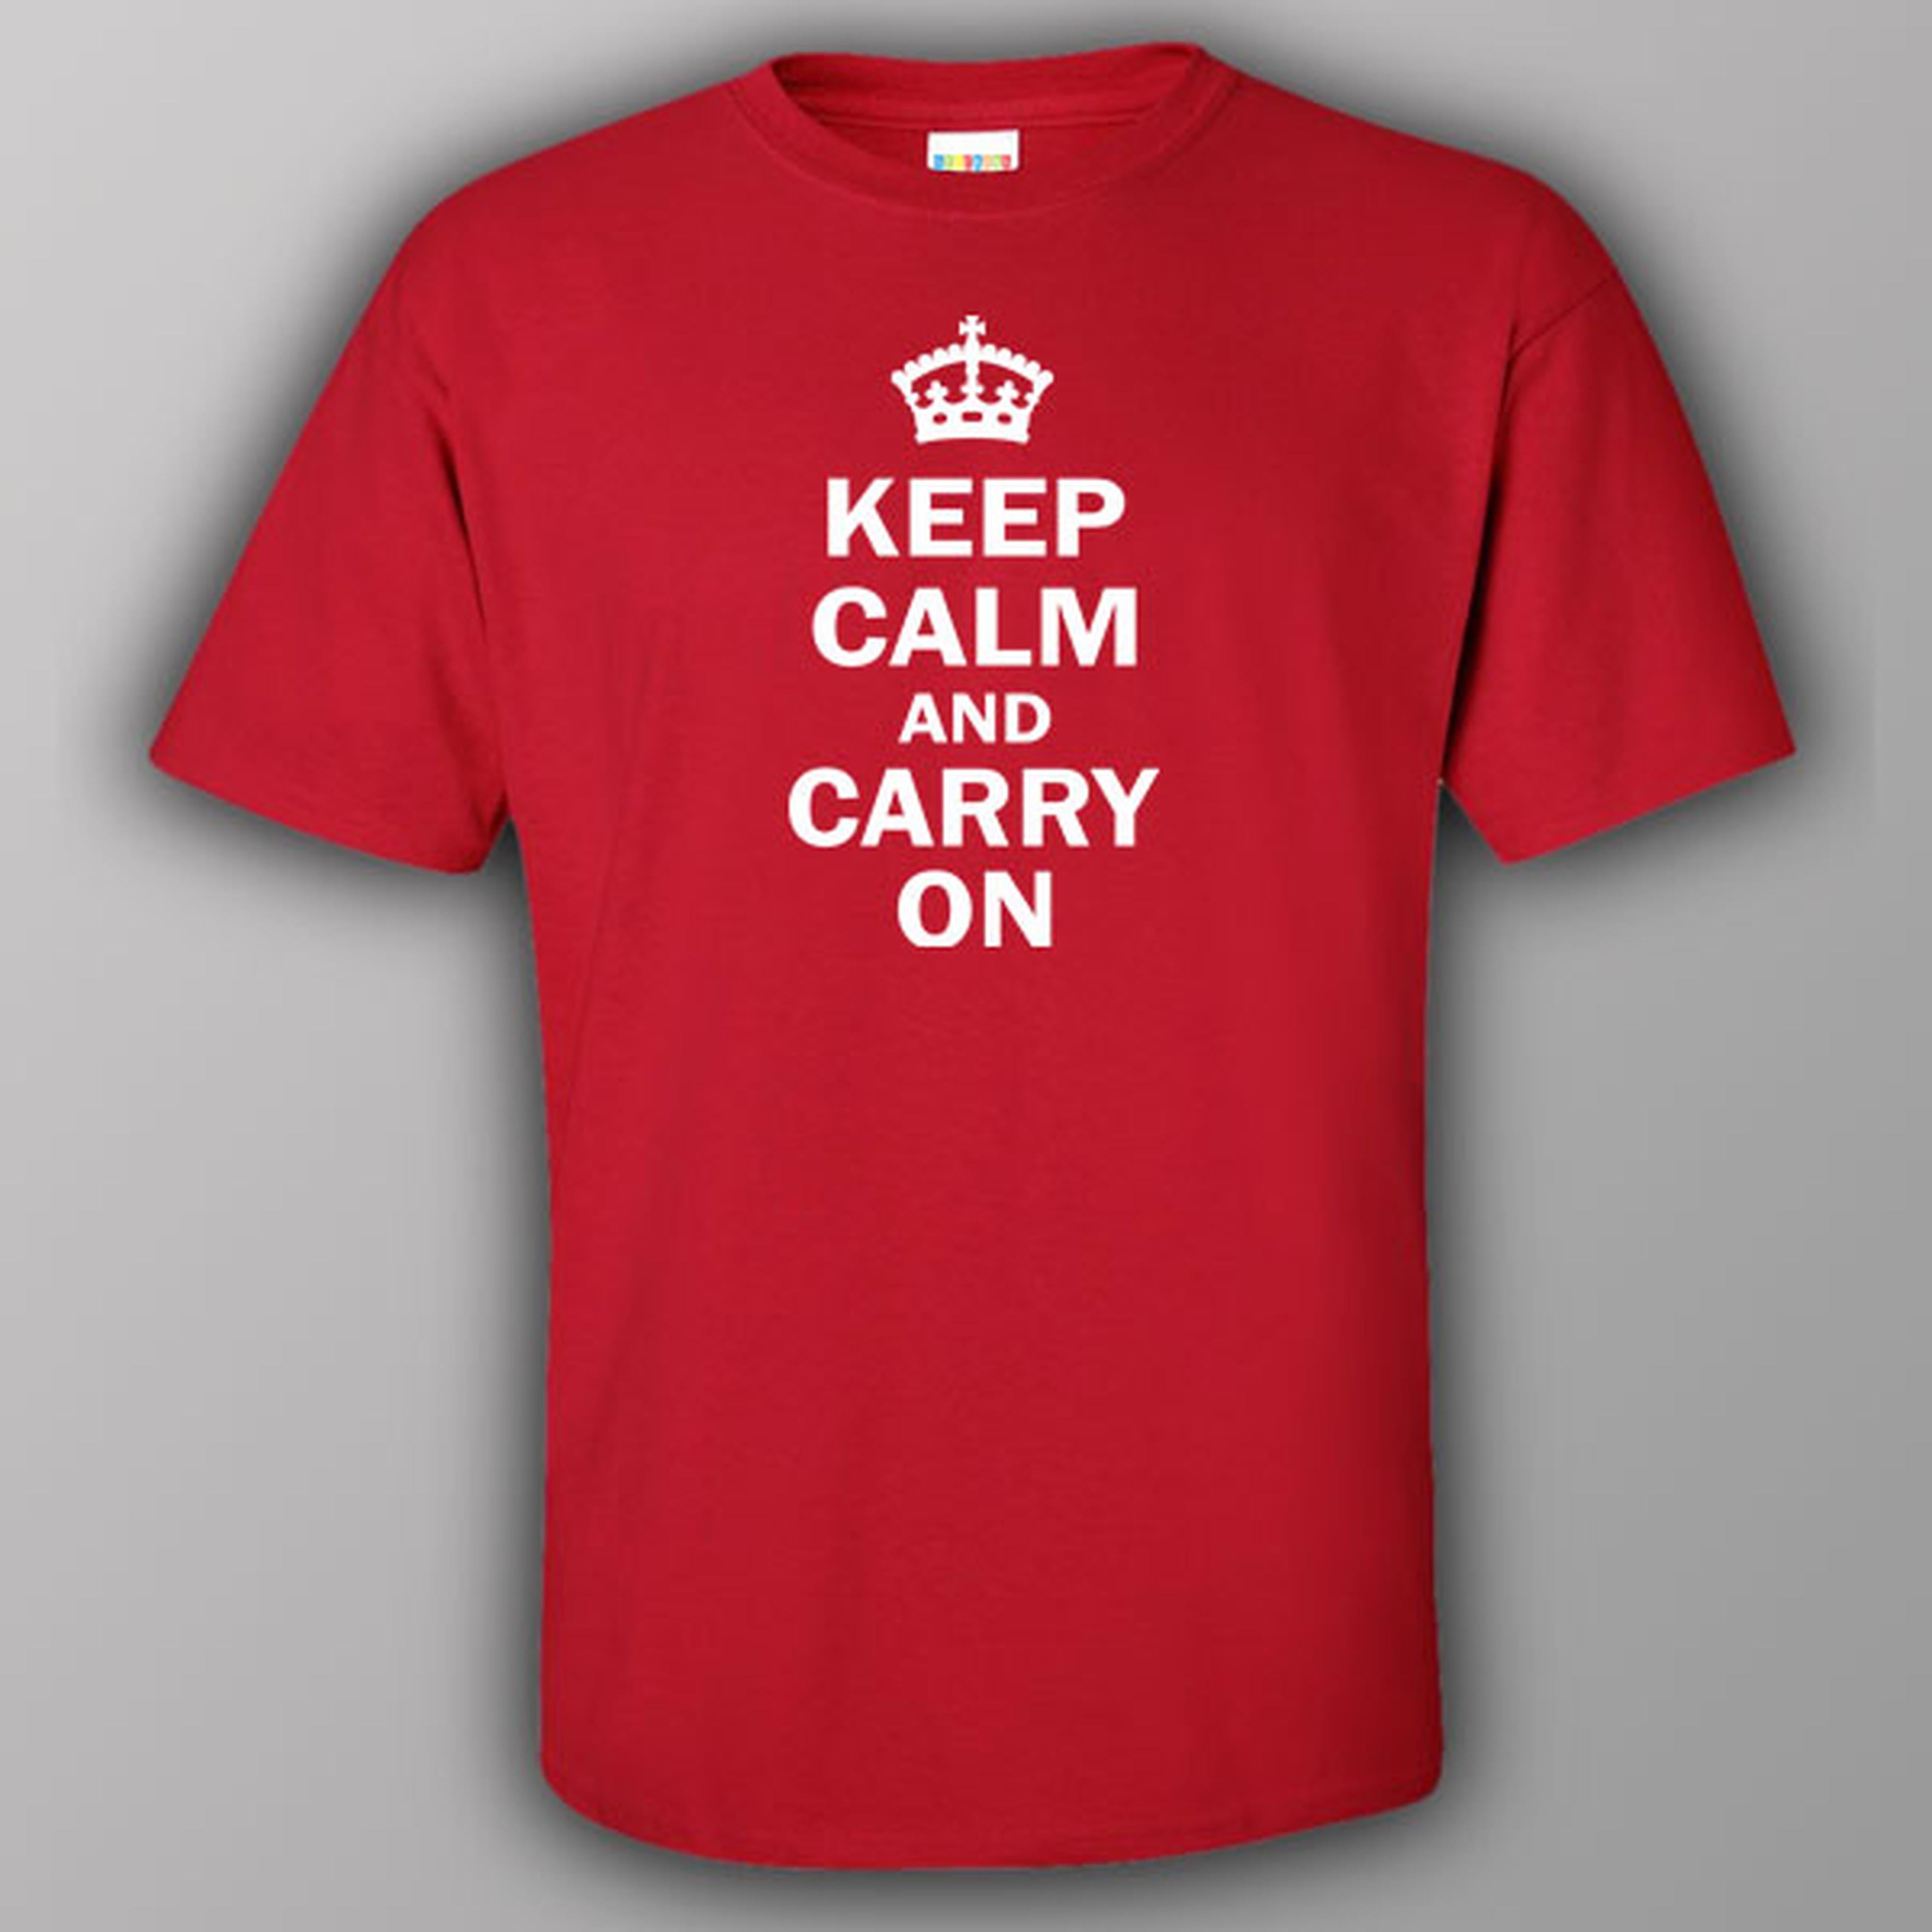 keep-calm-and-carry-on-t-shirt